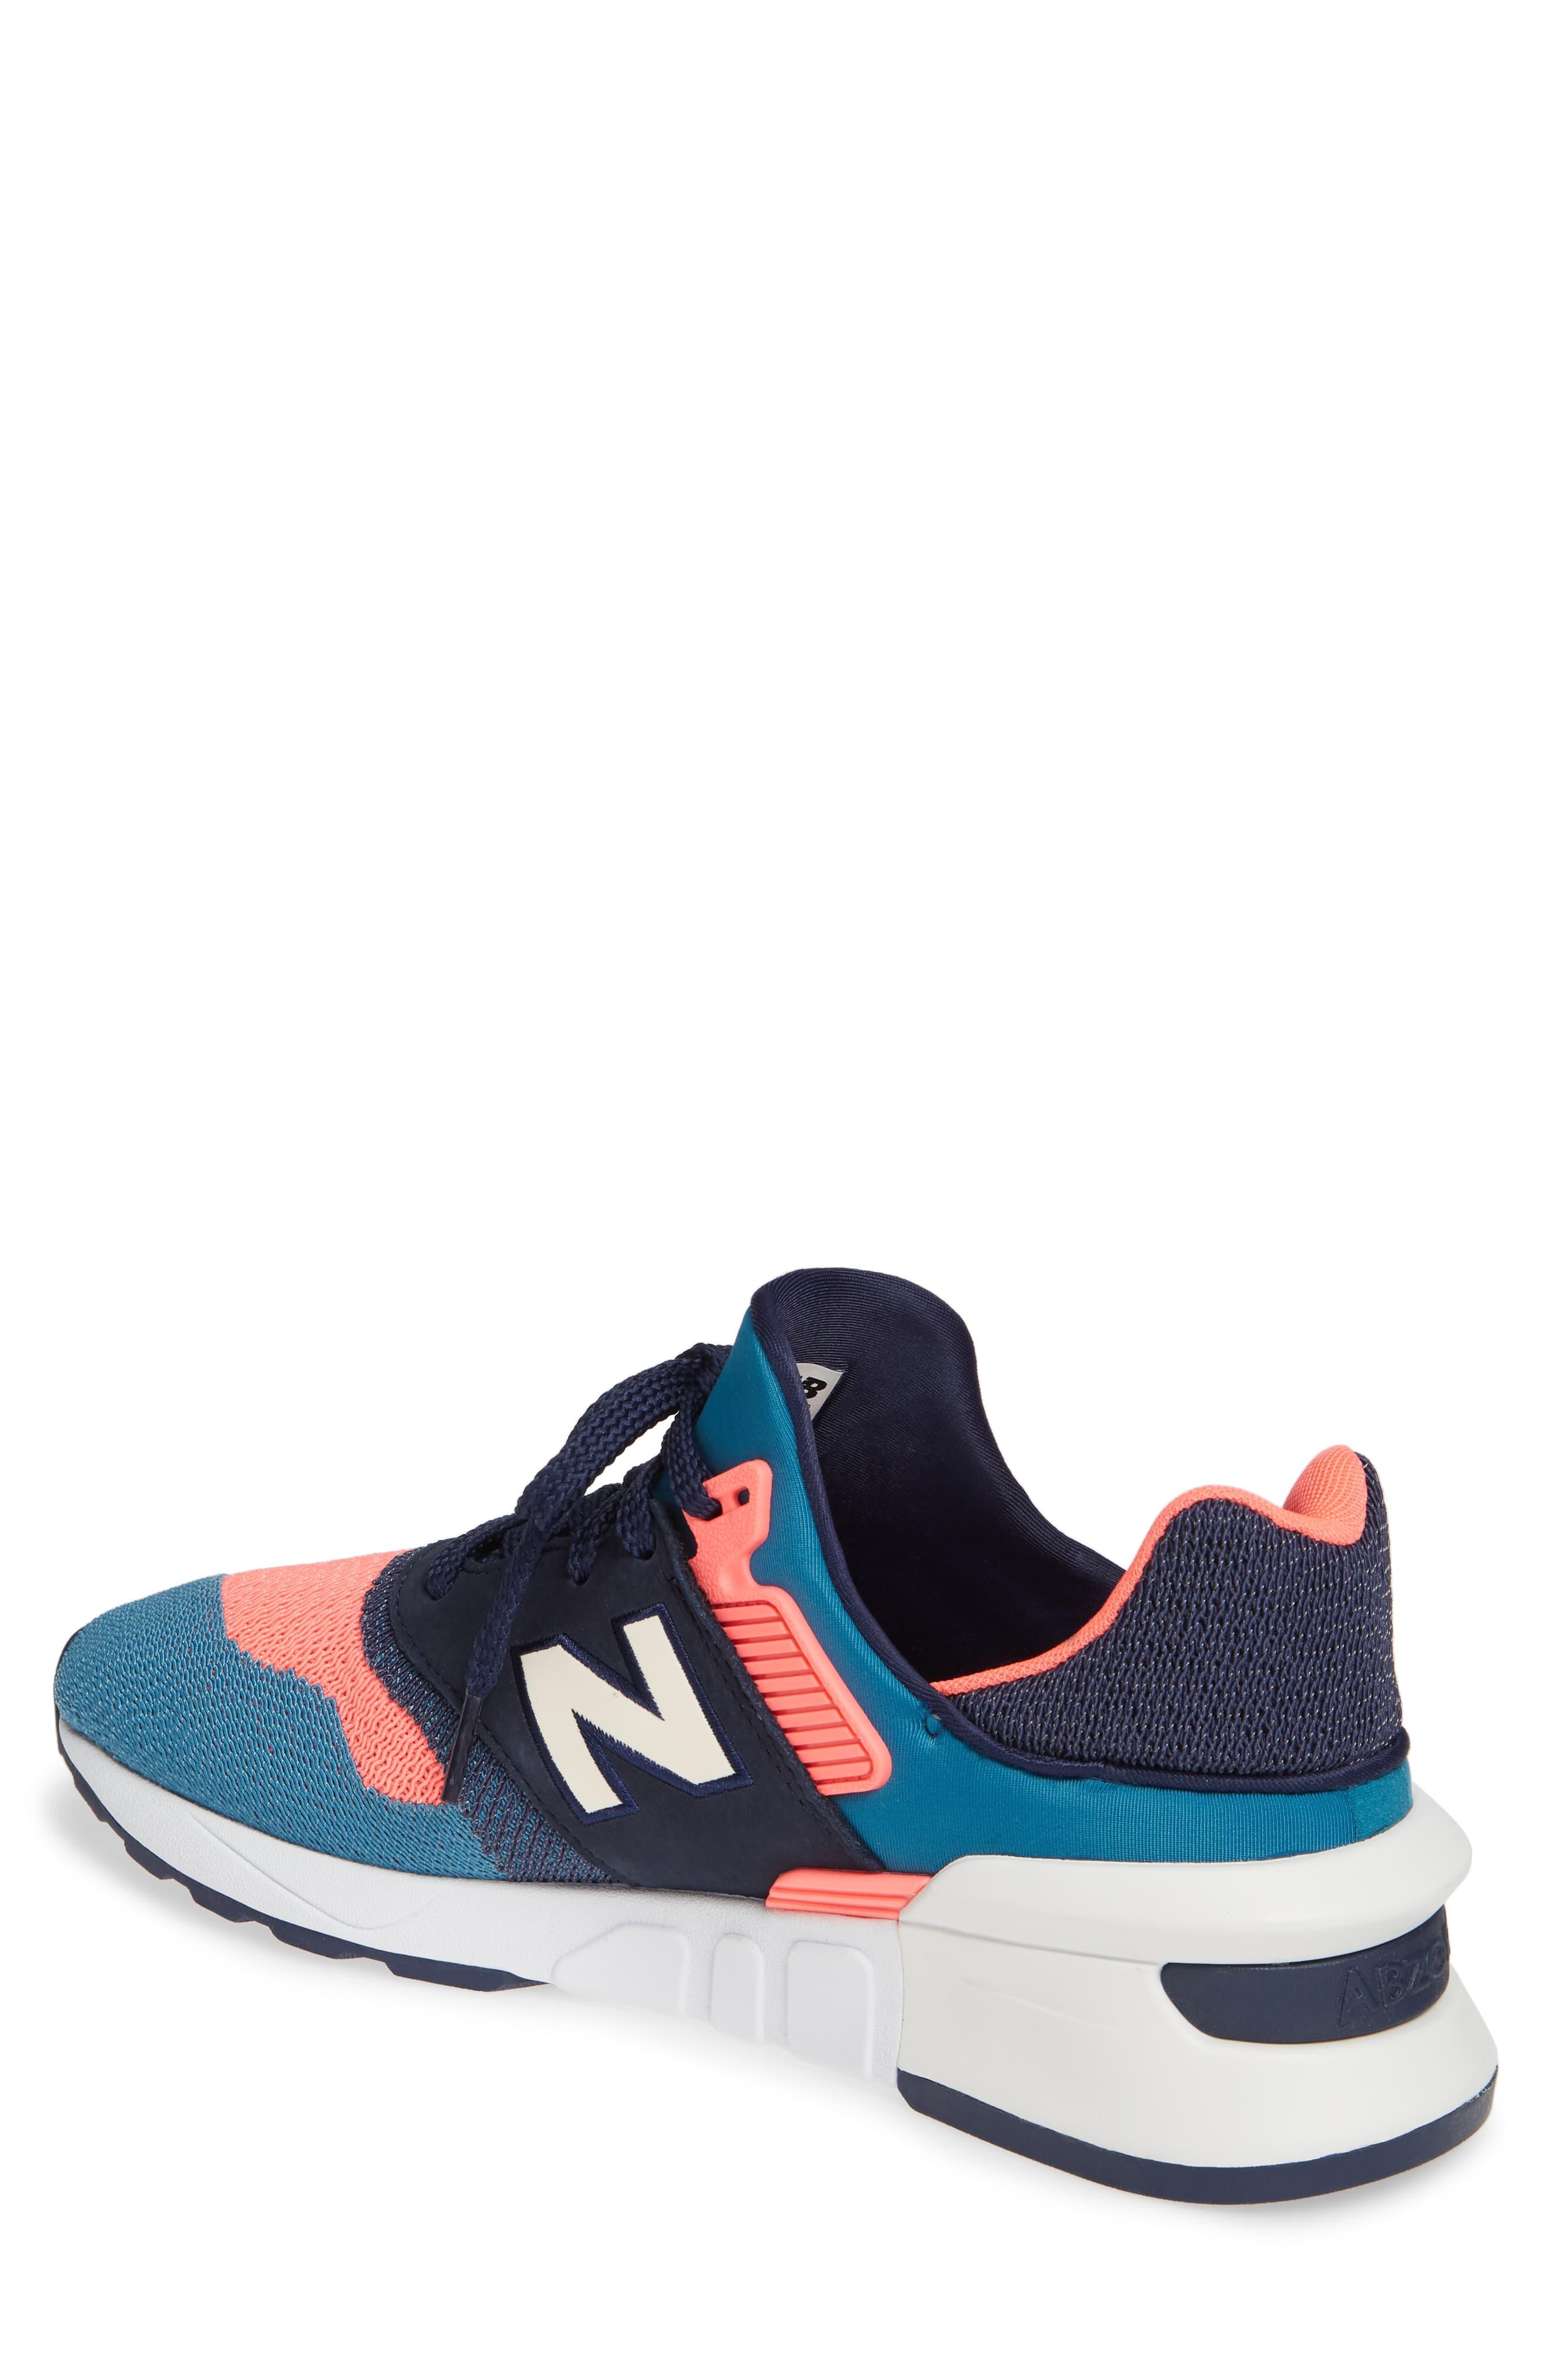 New Balance Rubber 997 Sport Trainers 